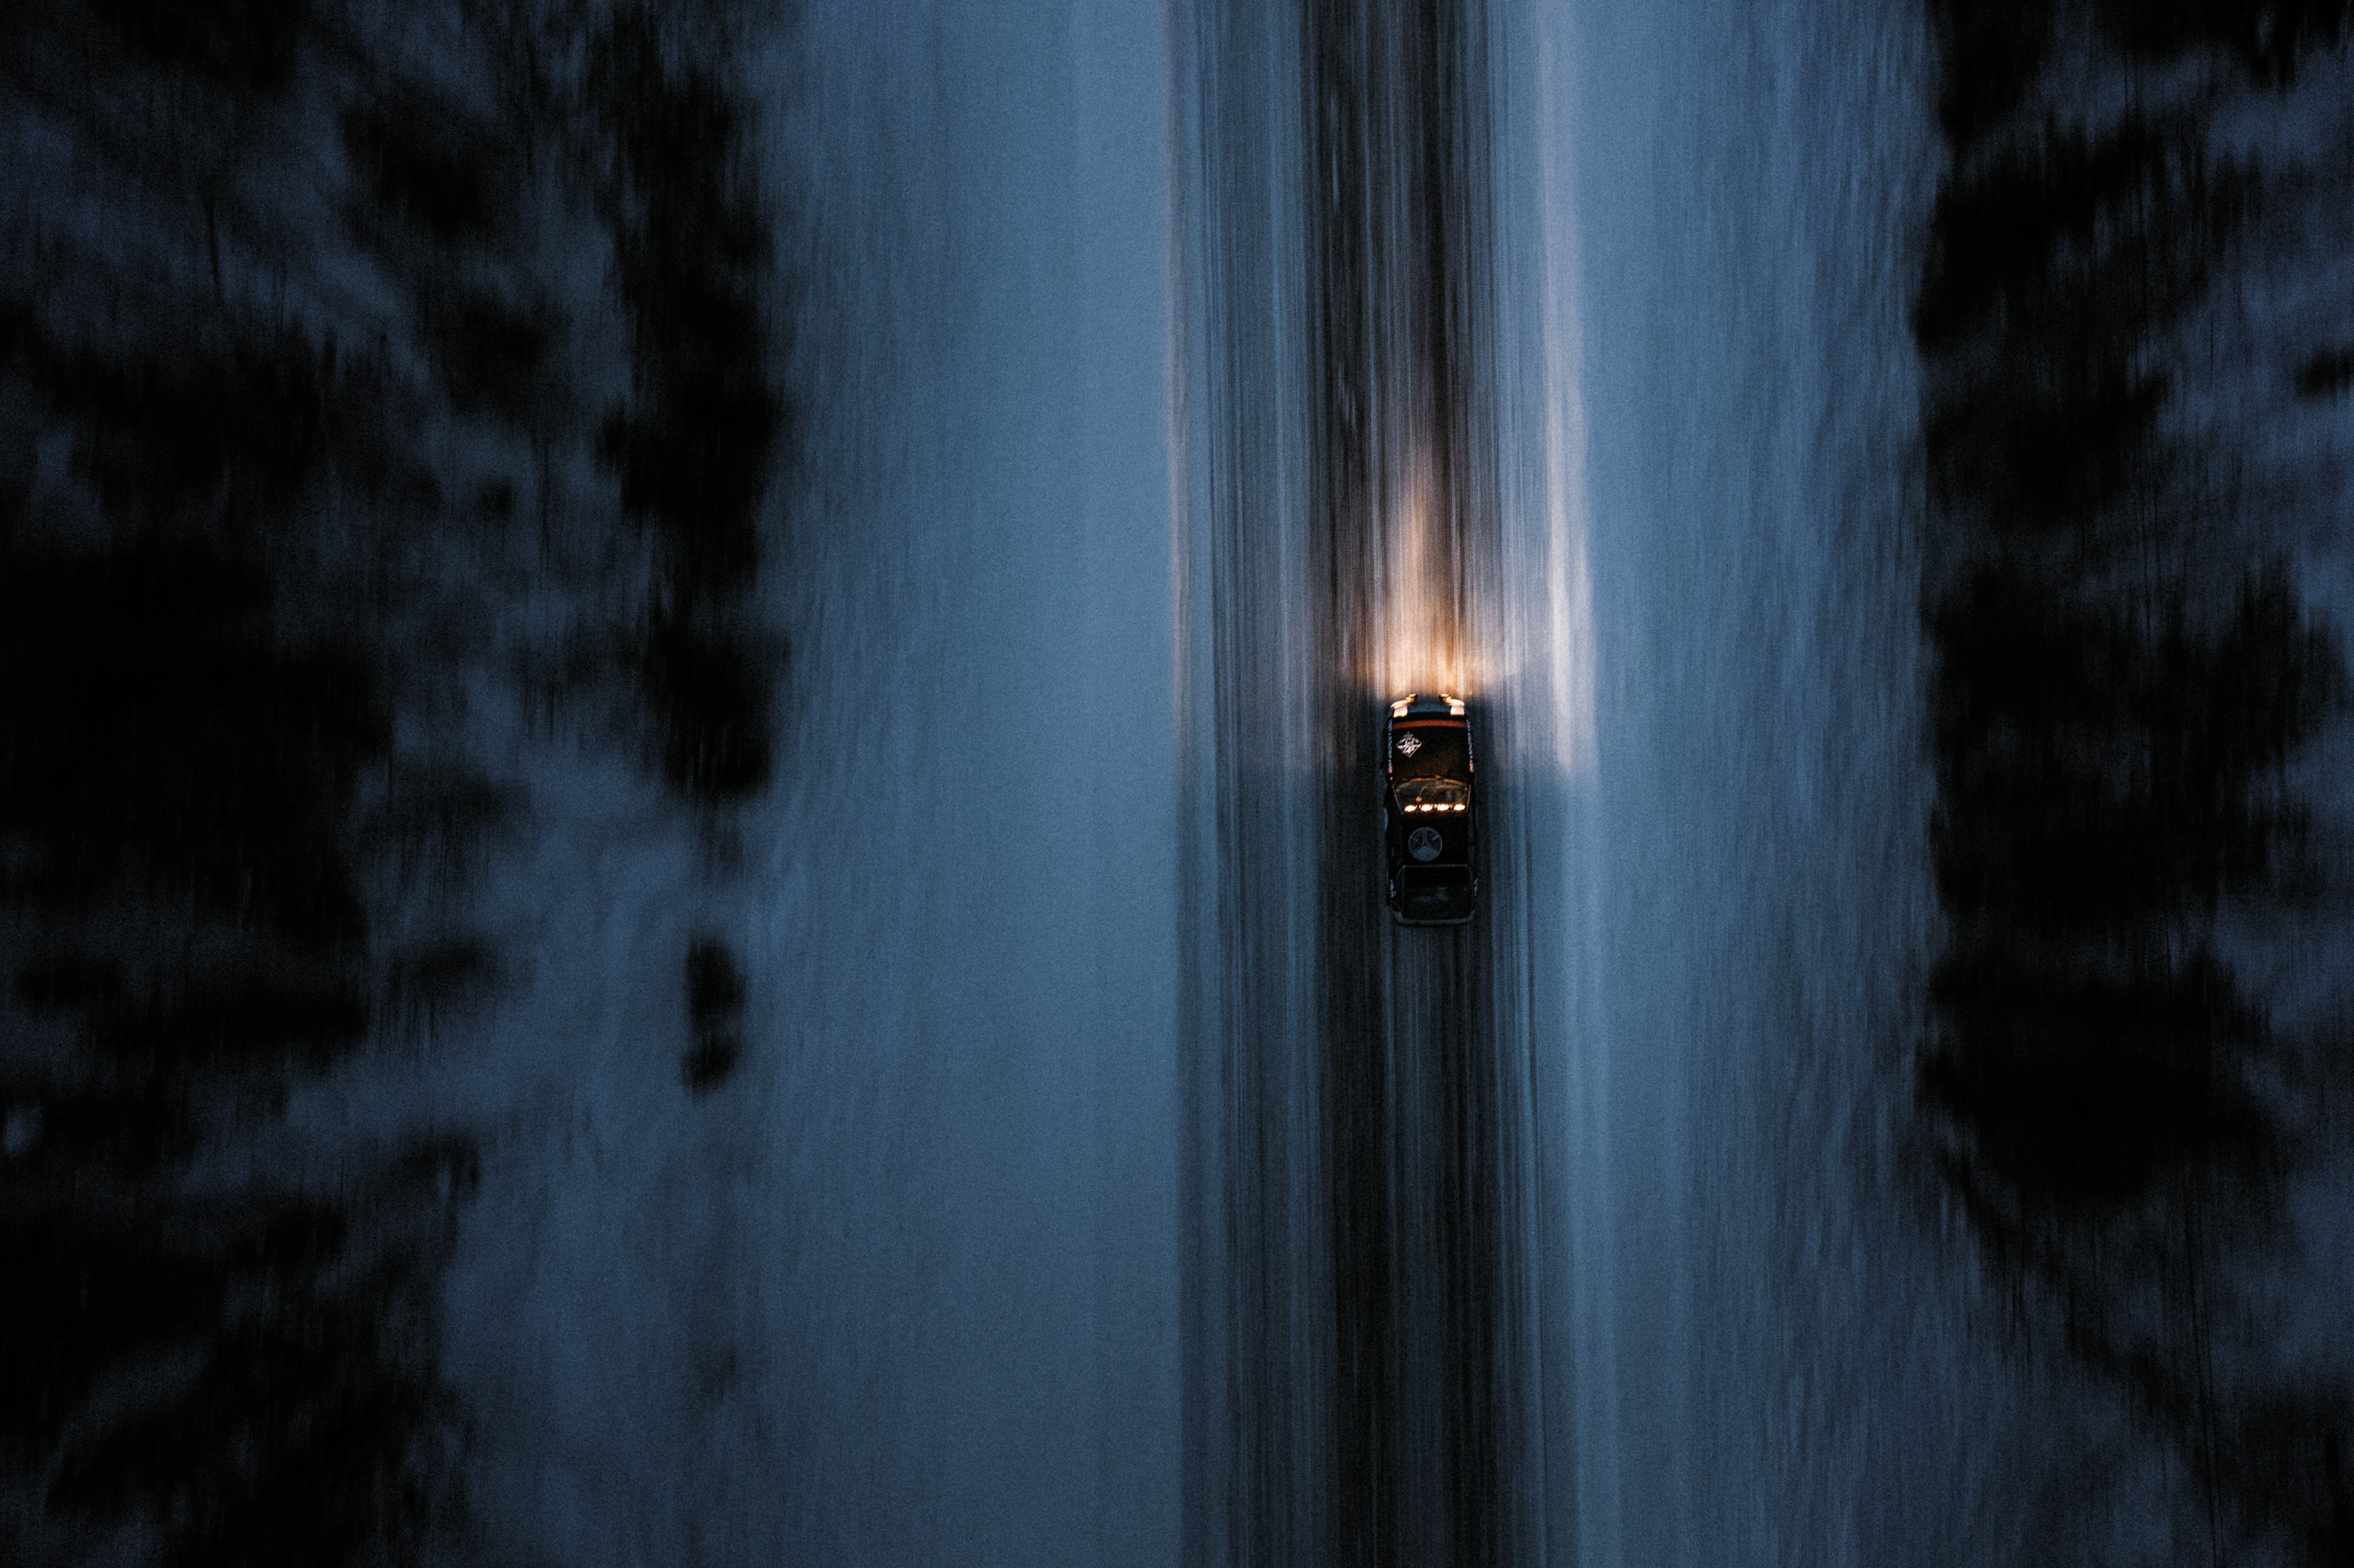 Driving through the Arctic in winter